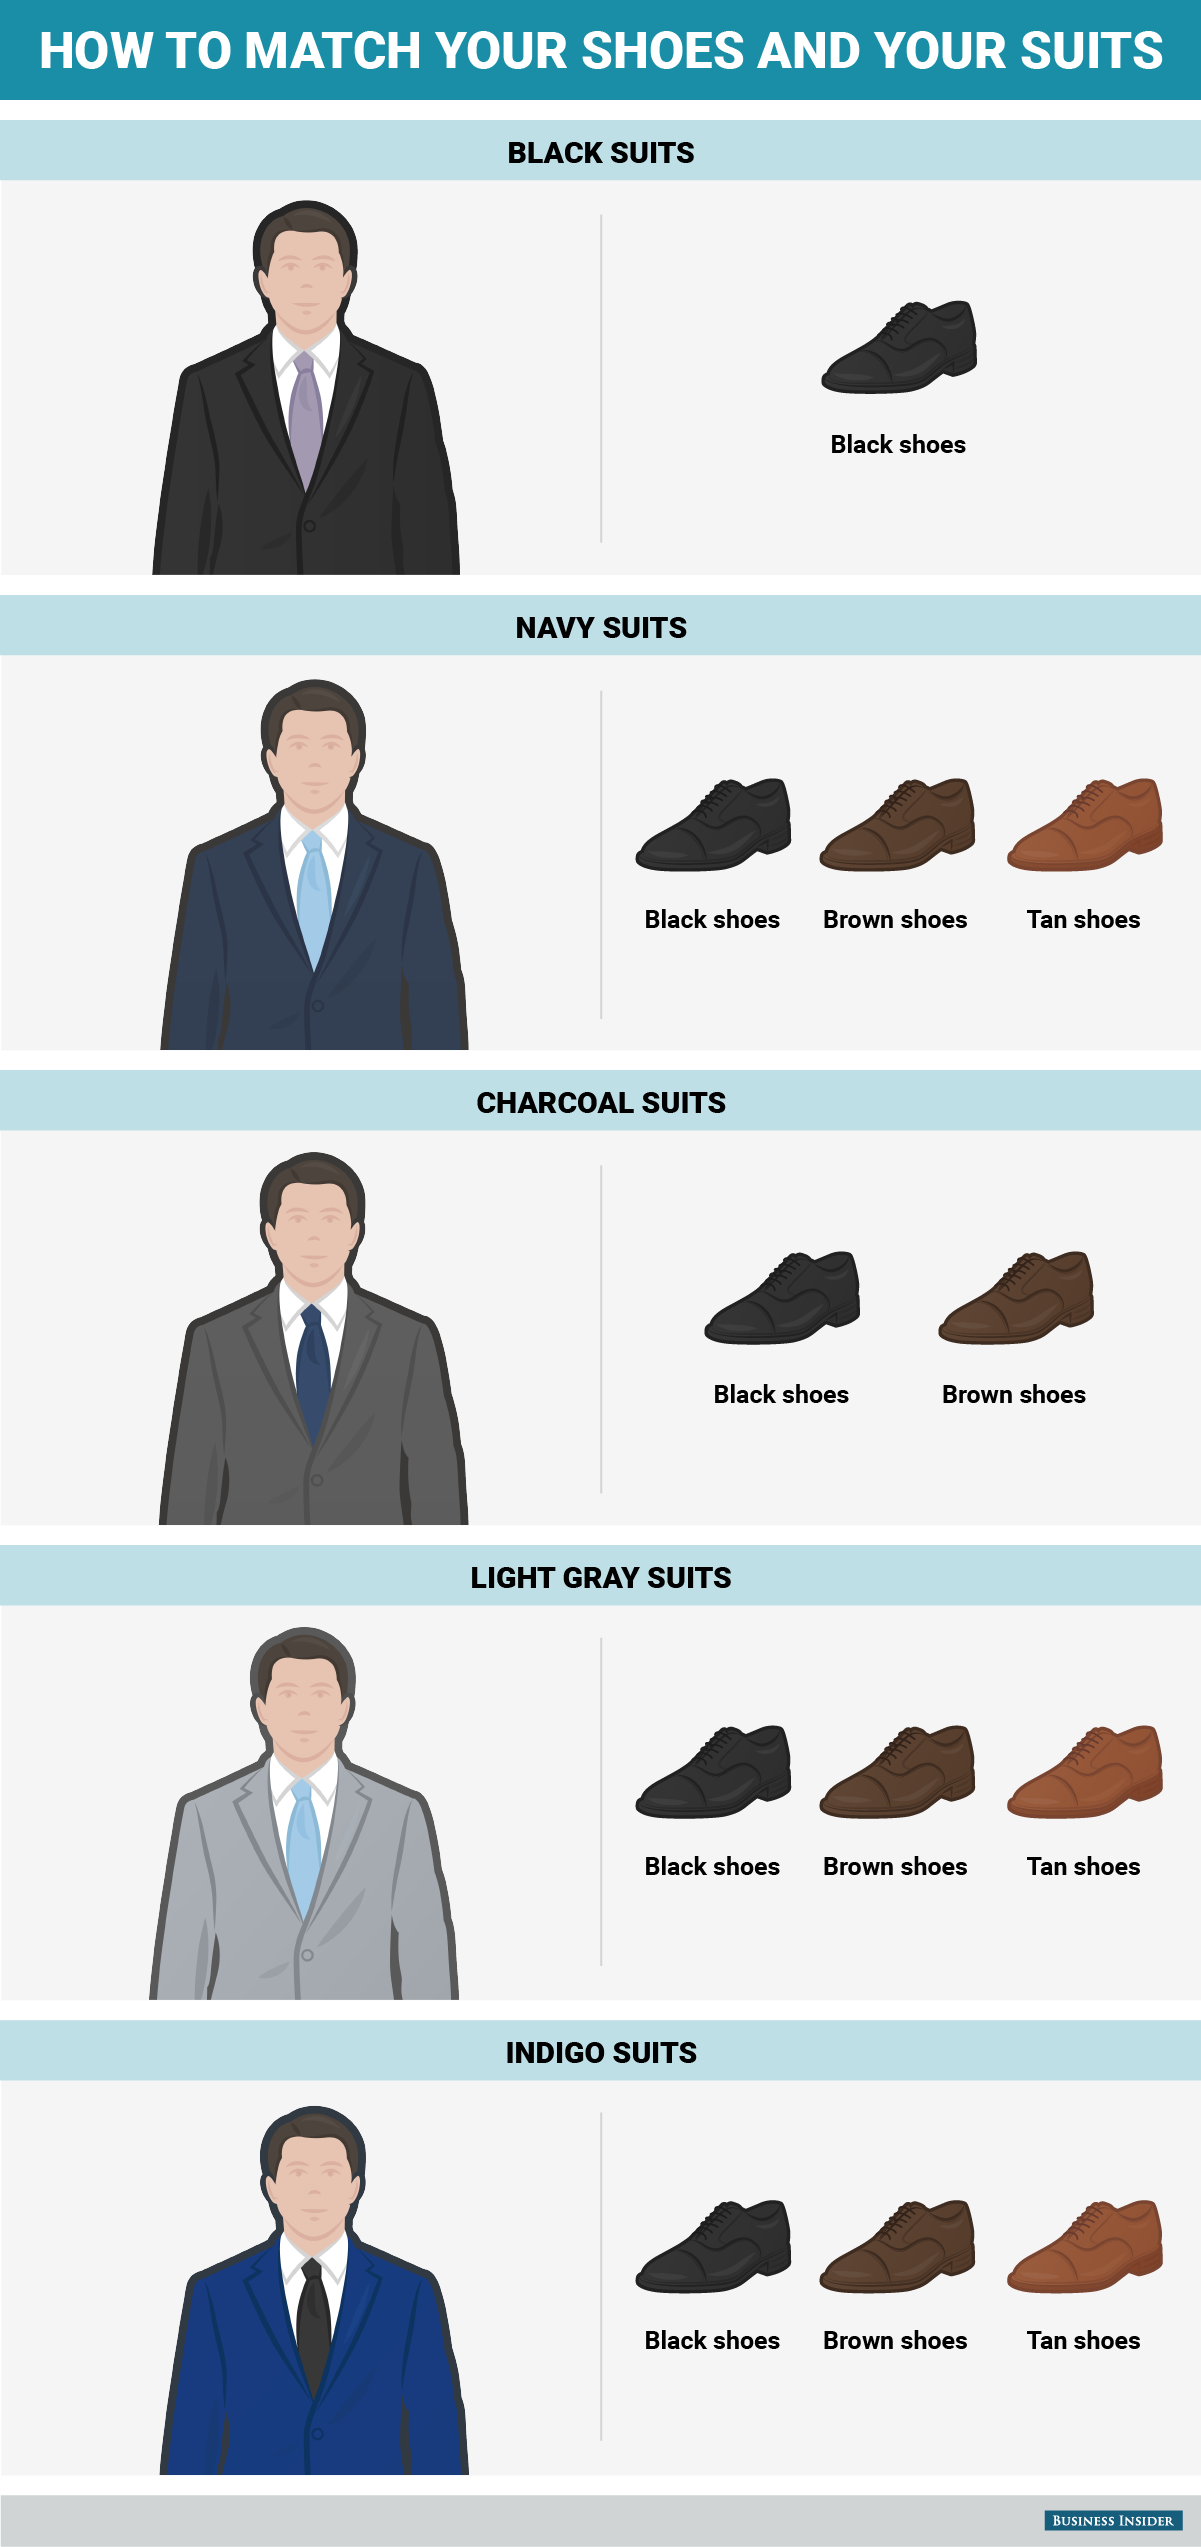 bi-graphics_how-to-match-your-suit-to-your-shoes.png